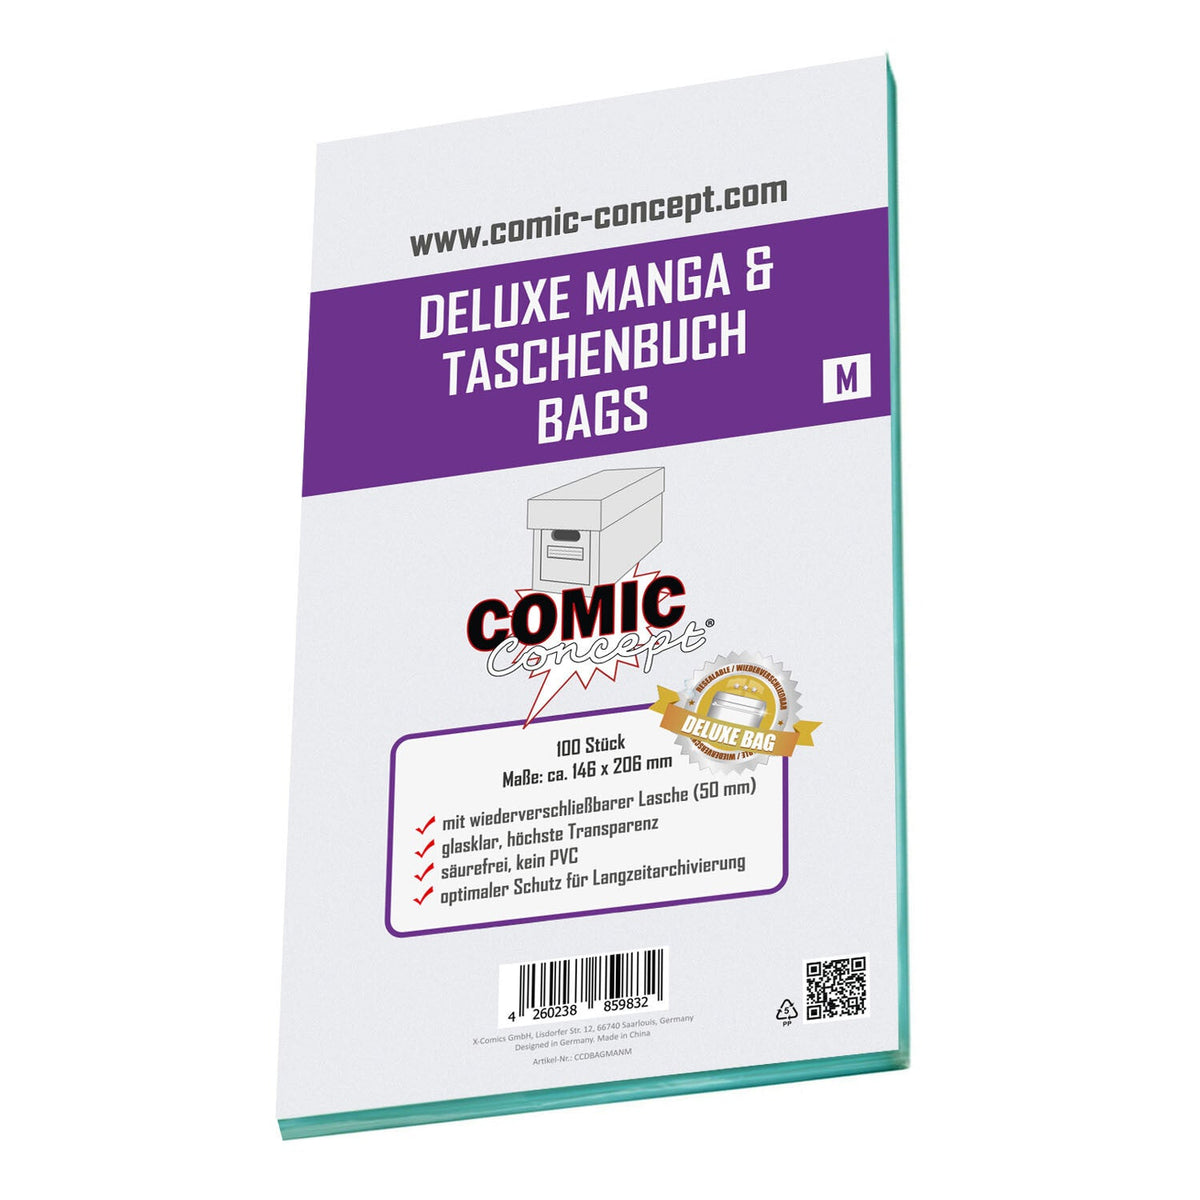 Comic Concept - Deluxe Manga Bags - Size M (146 x 206 mm) 100 pieces